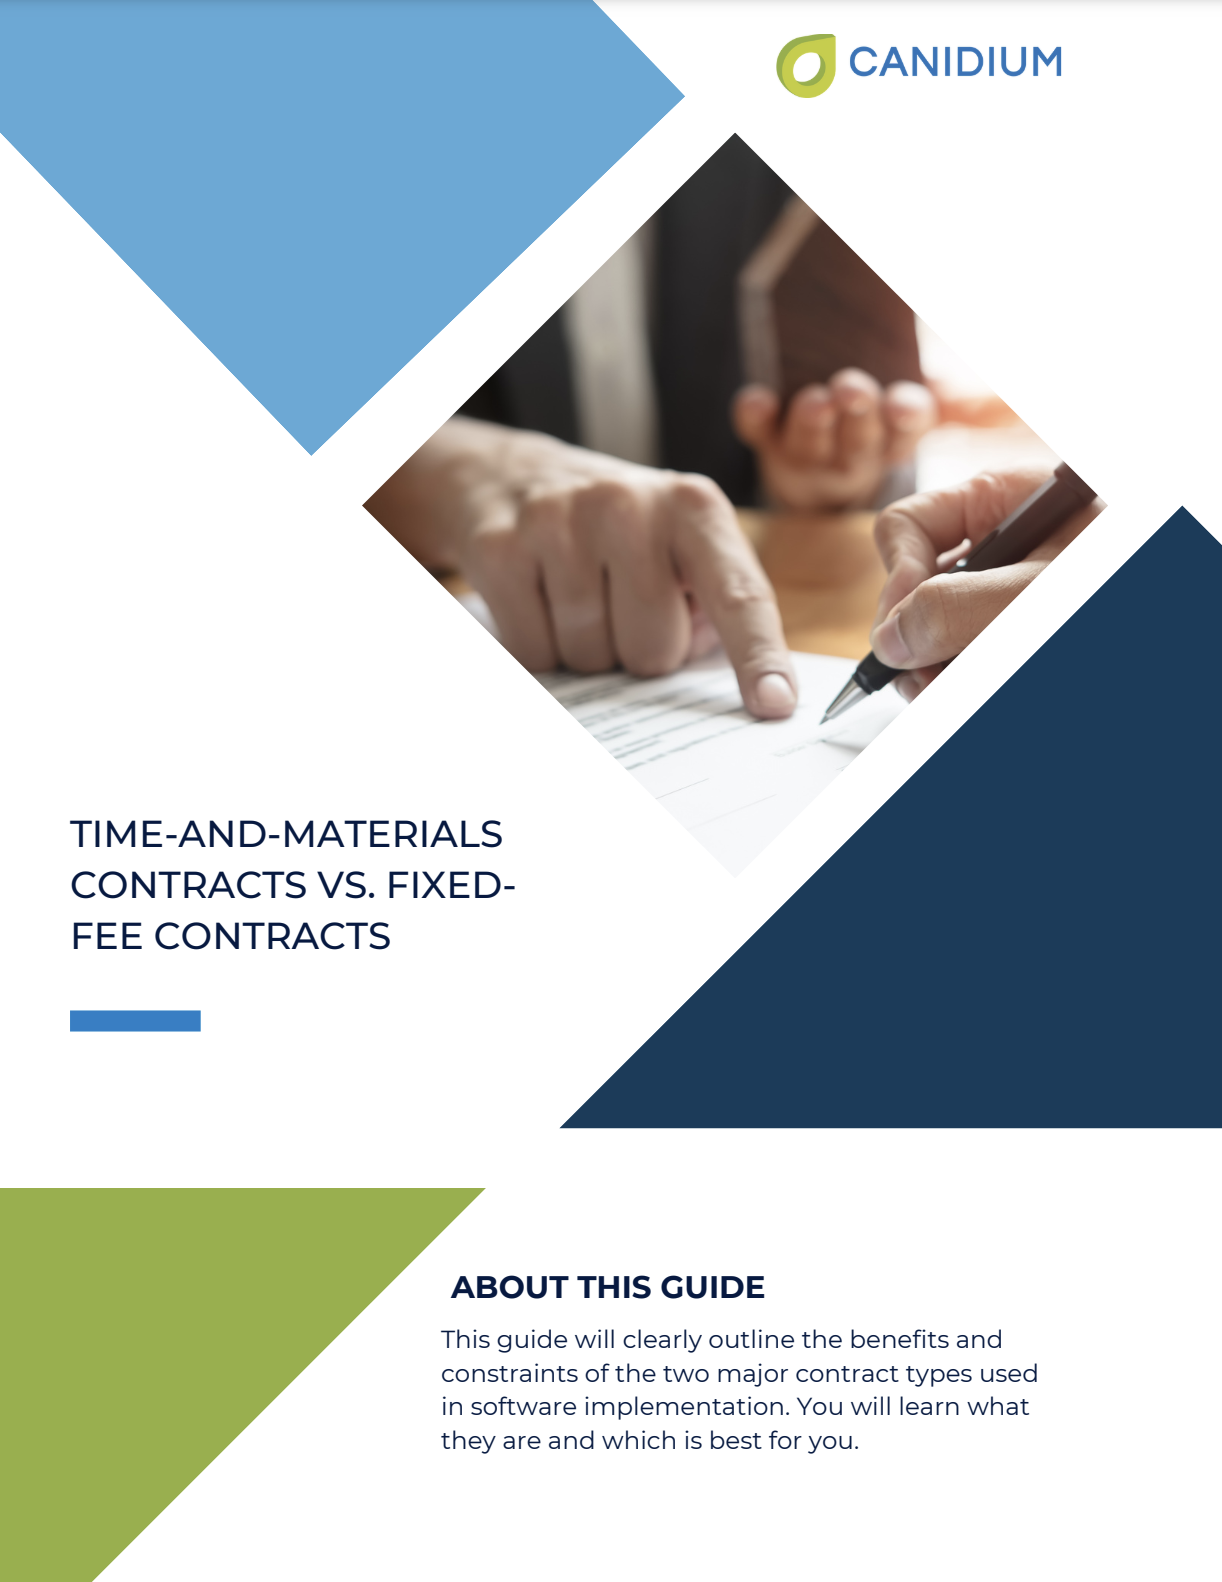 Time-and-Materials Contracts vs. Fixed Fee Contracts